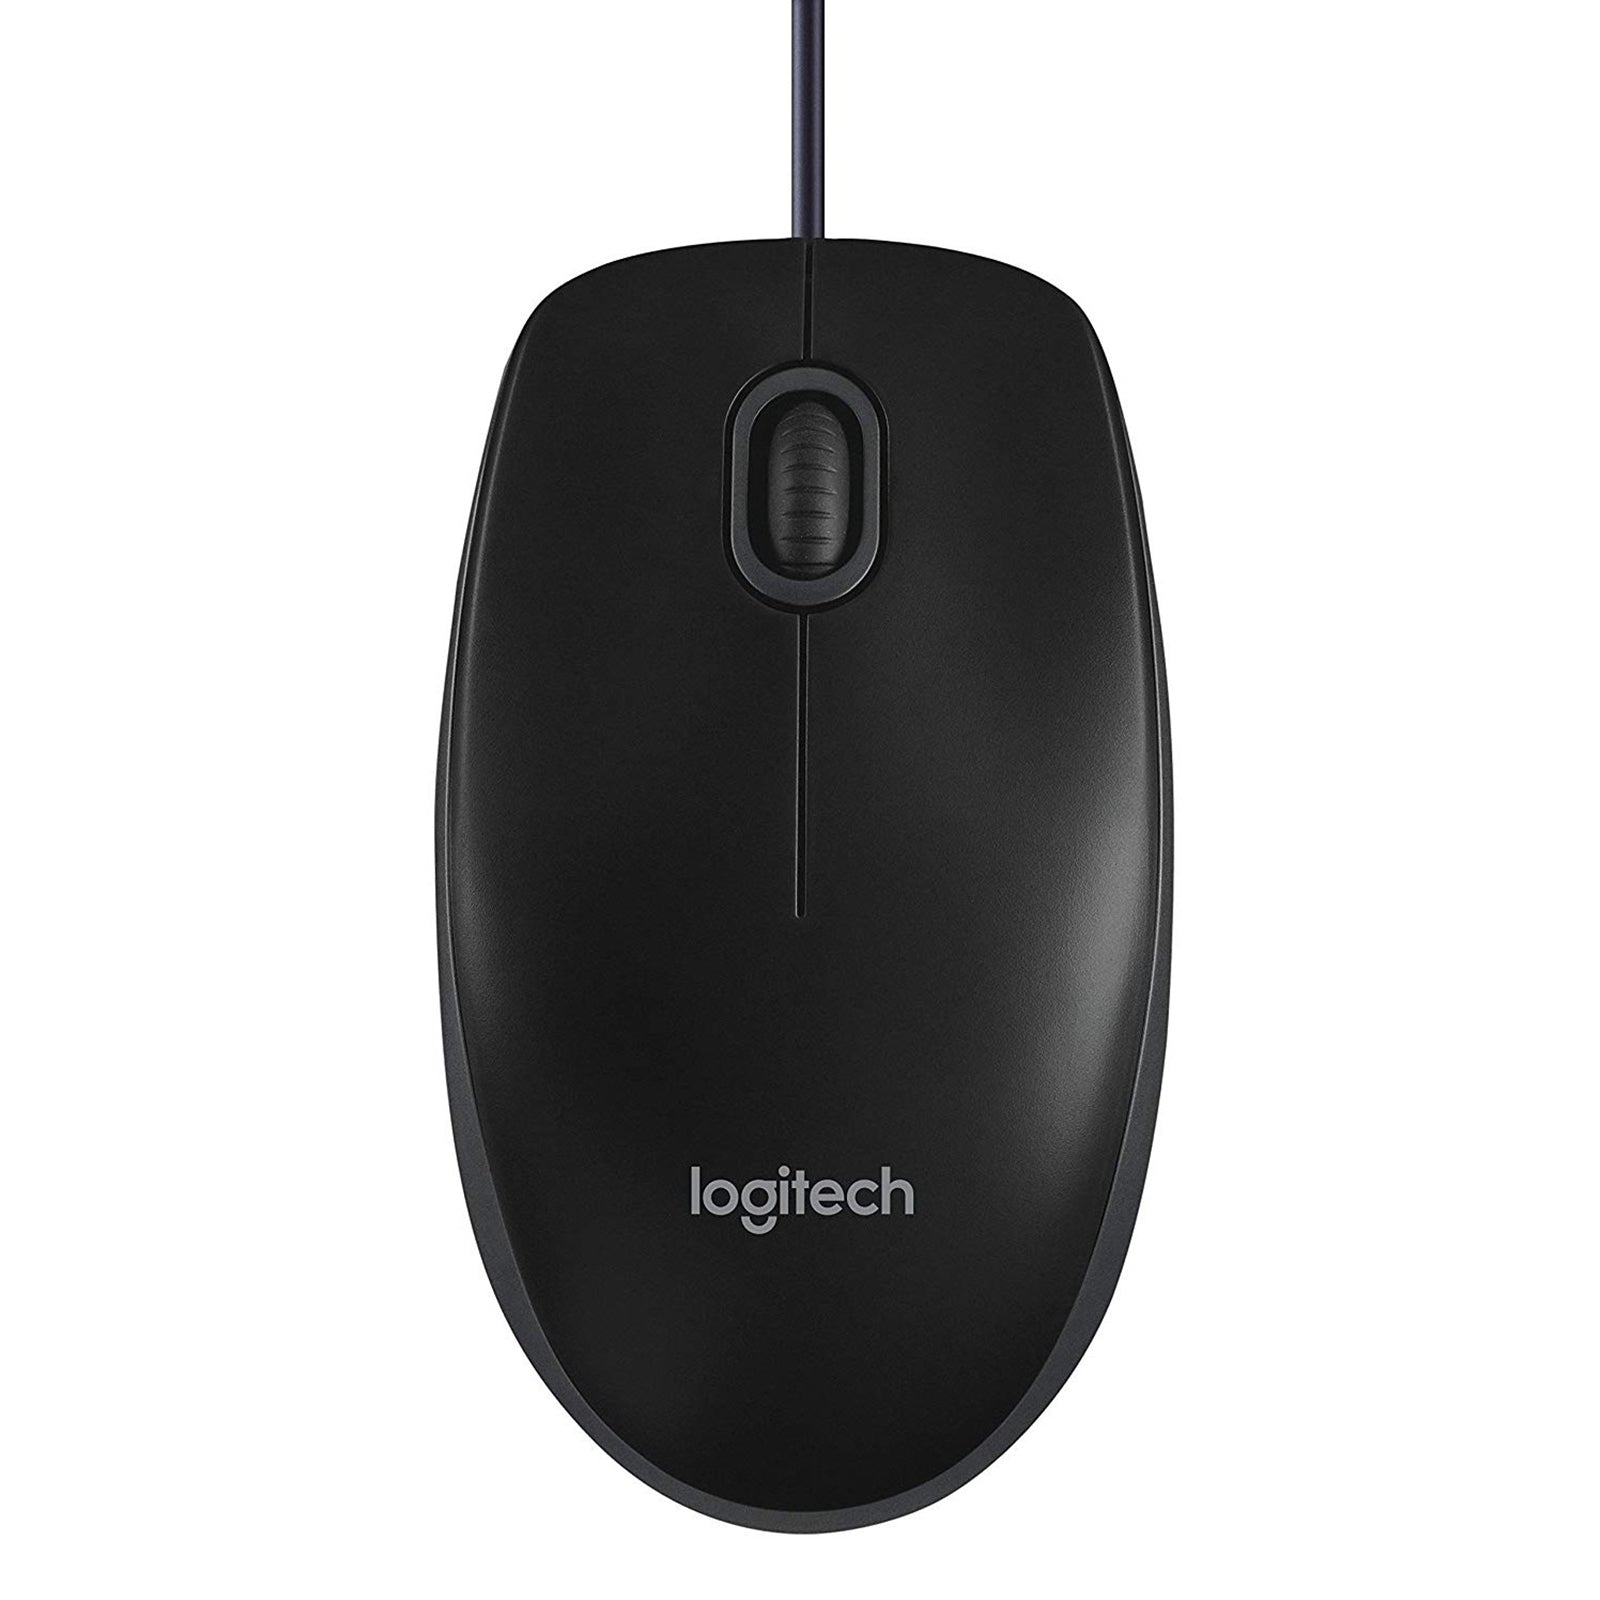 Logitech B100 Wired Optical Mouse High Precision Ambidextrous Design Black